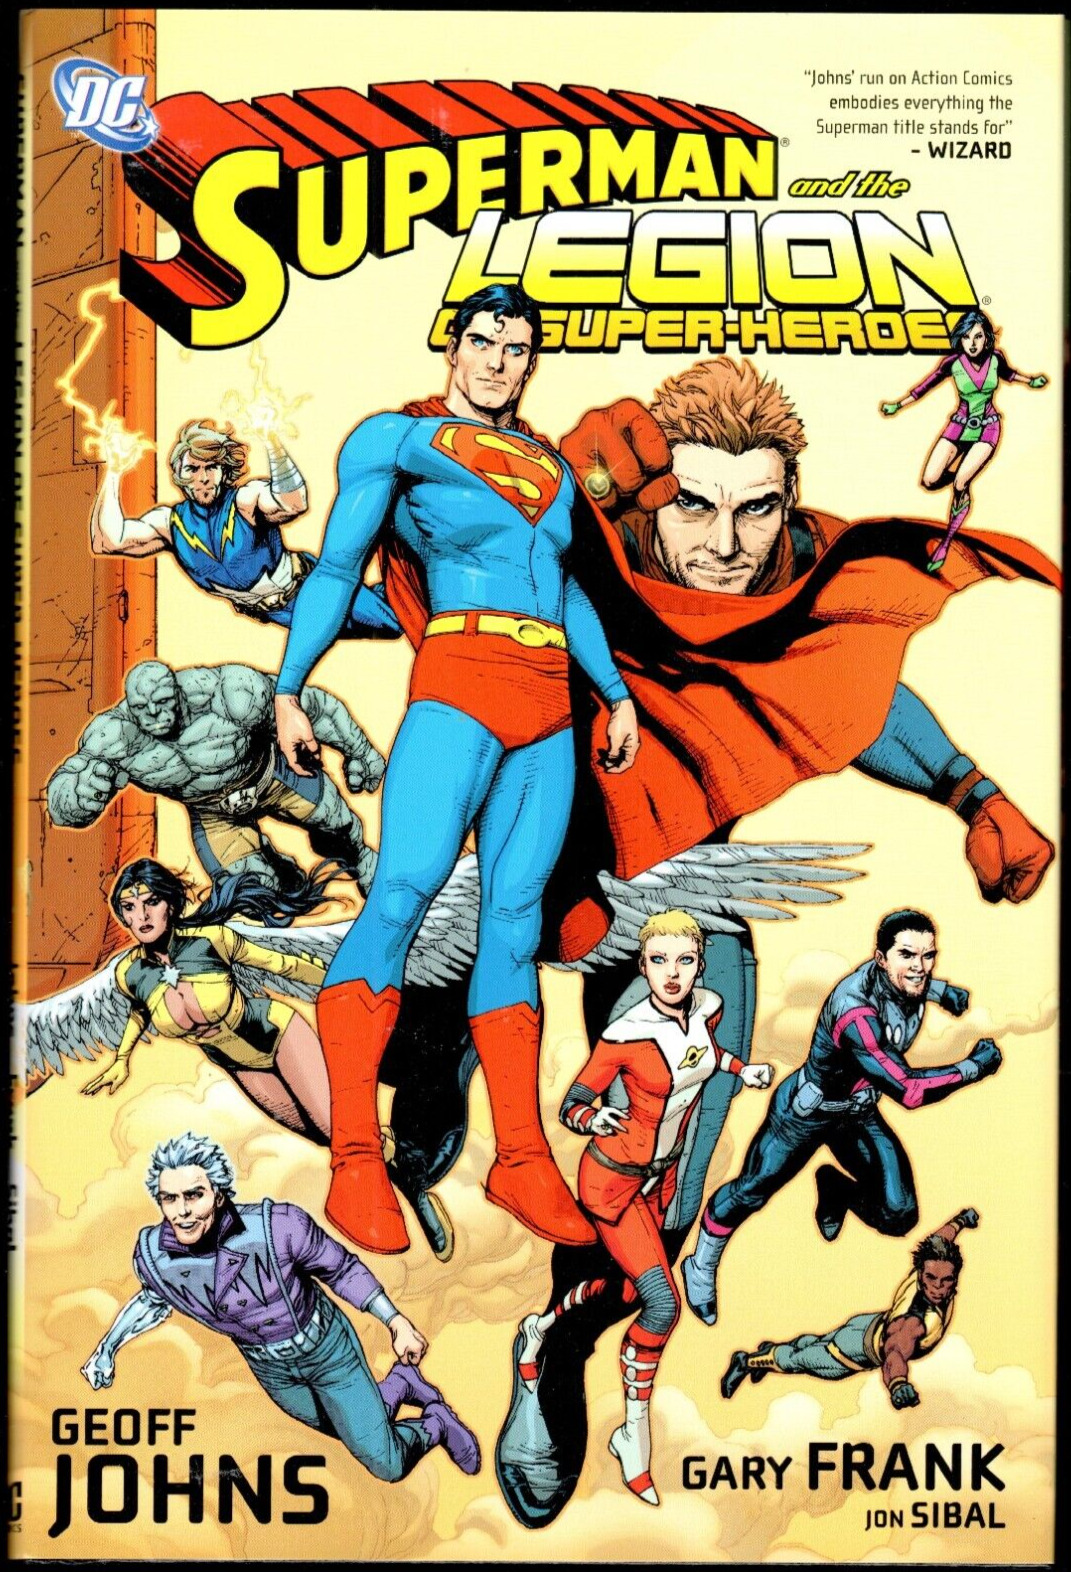 SUPERMAN and the LEGION OF SUPER-HEROES  HARDCOVER  Geoff Johns   NM/M (9.8)  HC